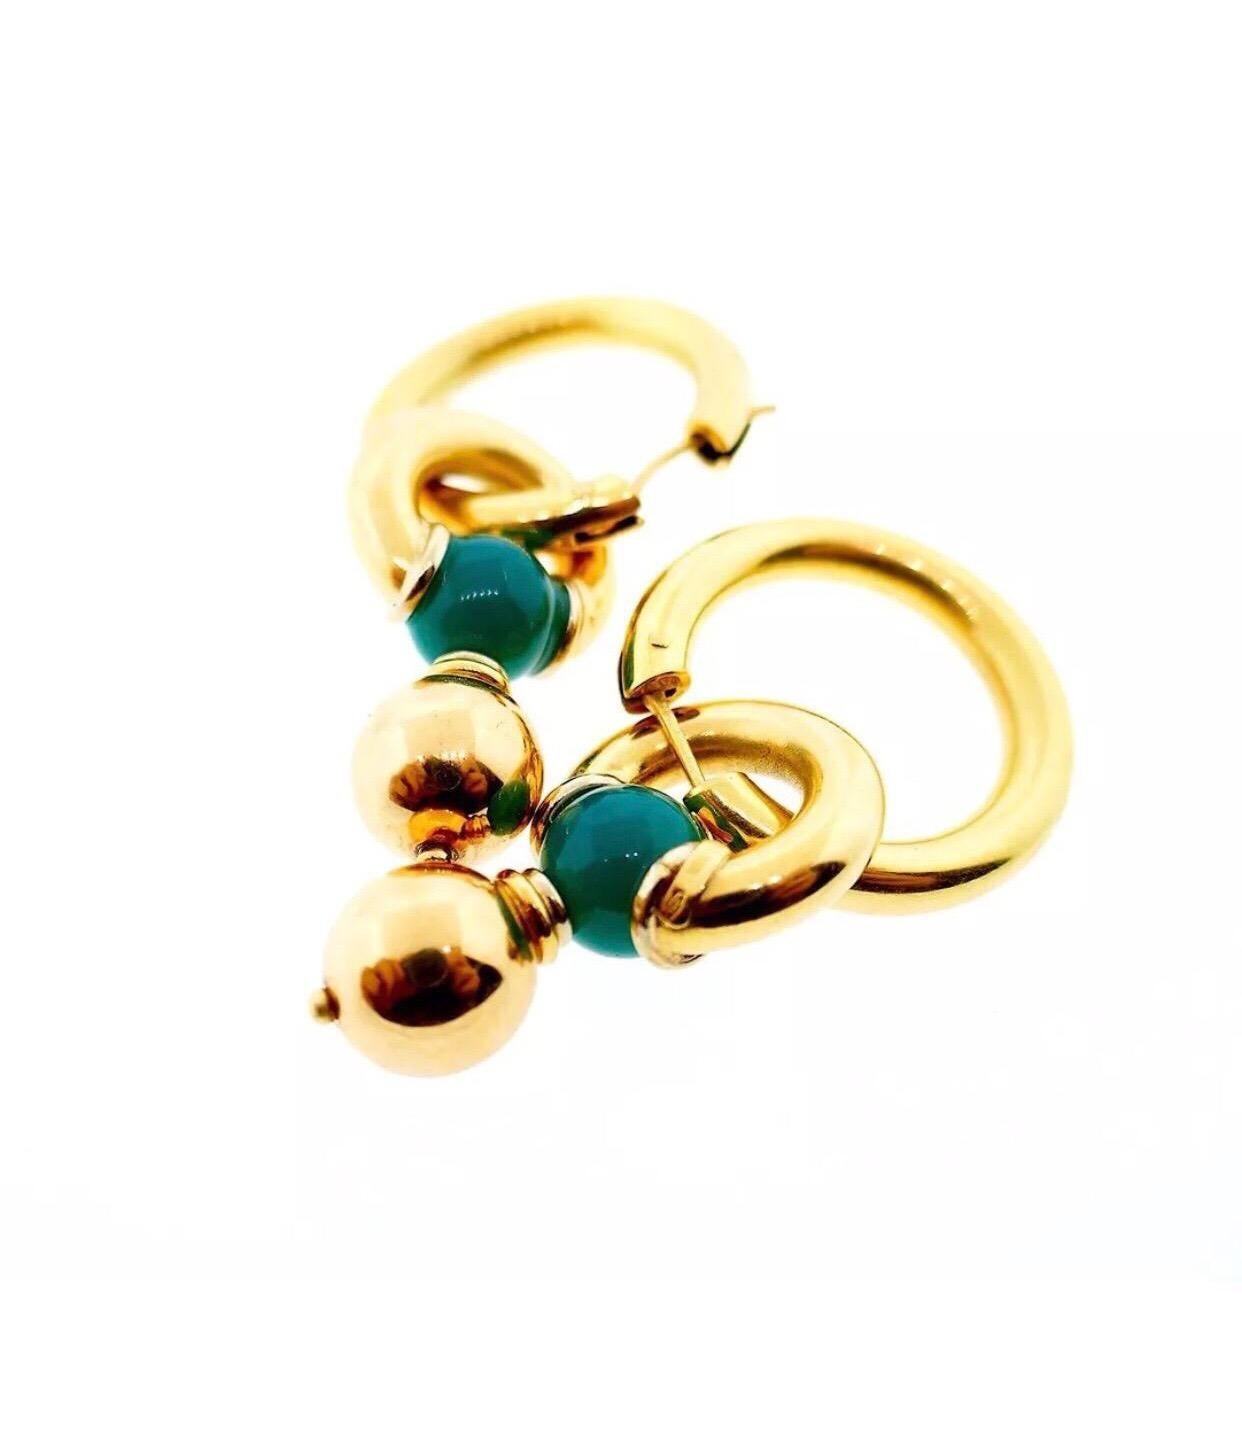 Italian 18 Karat Yellow Gold Chrysoprase Interchangeable Earrings

These are very fun and versatile earrings featuring a unique design and excellent Italian craftsmanship. The earrings can be worn as a drop earring or as plain hoops by detaching the